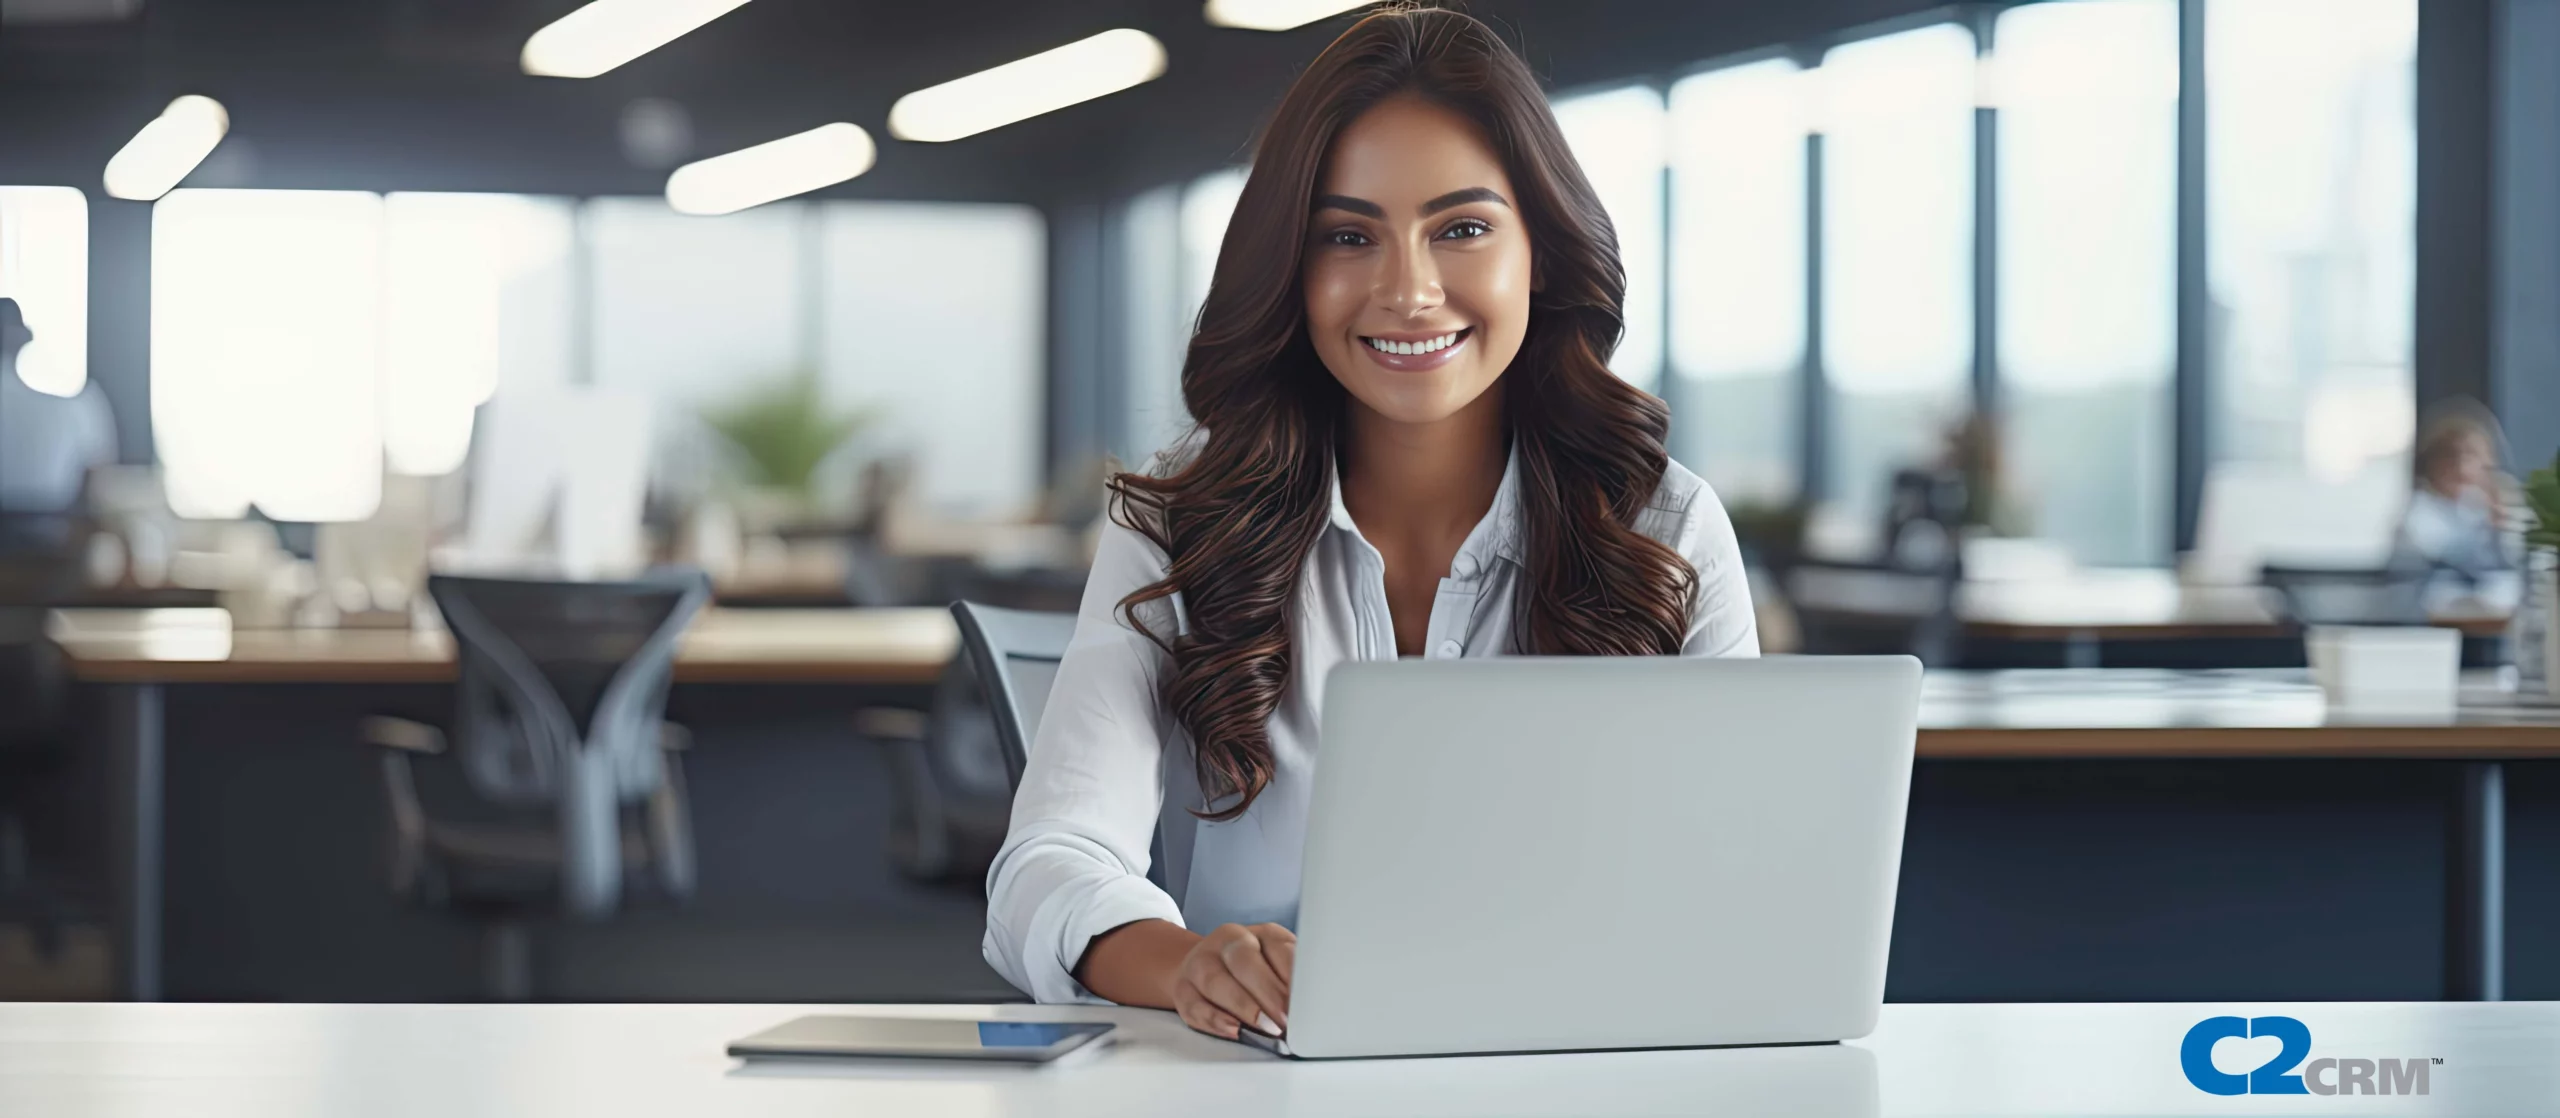 lady smiling using C2CRM on laptop